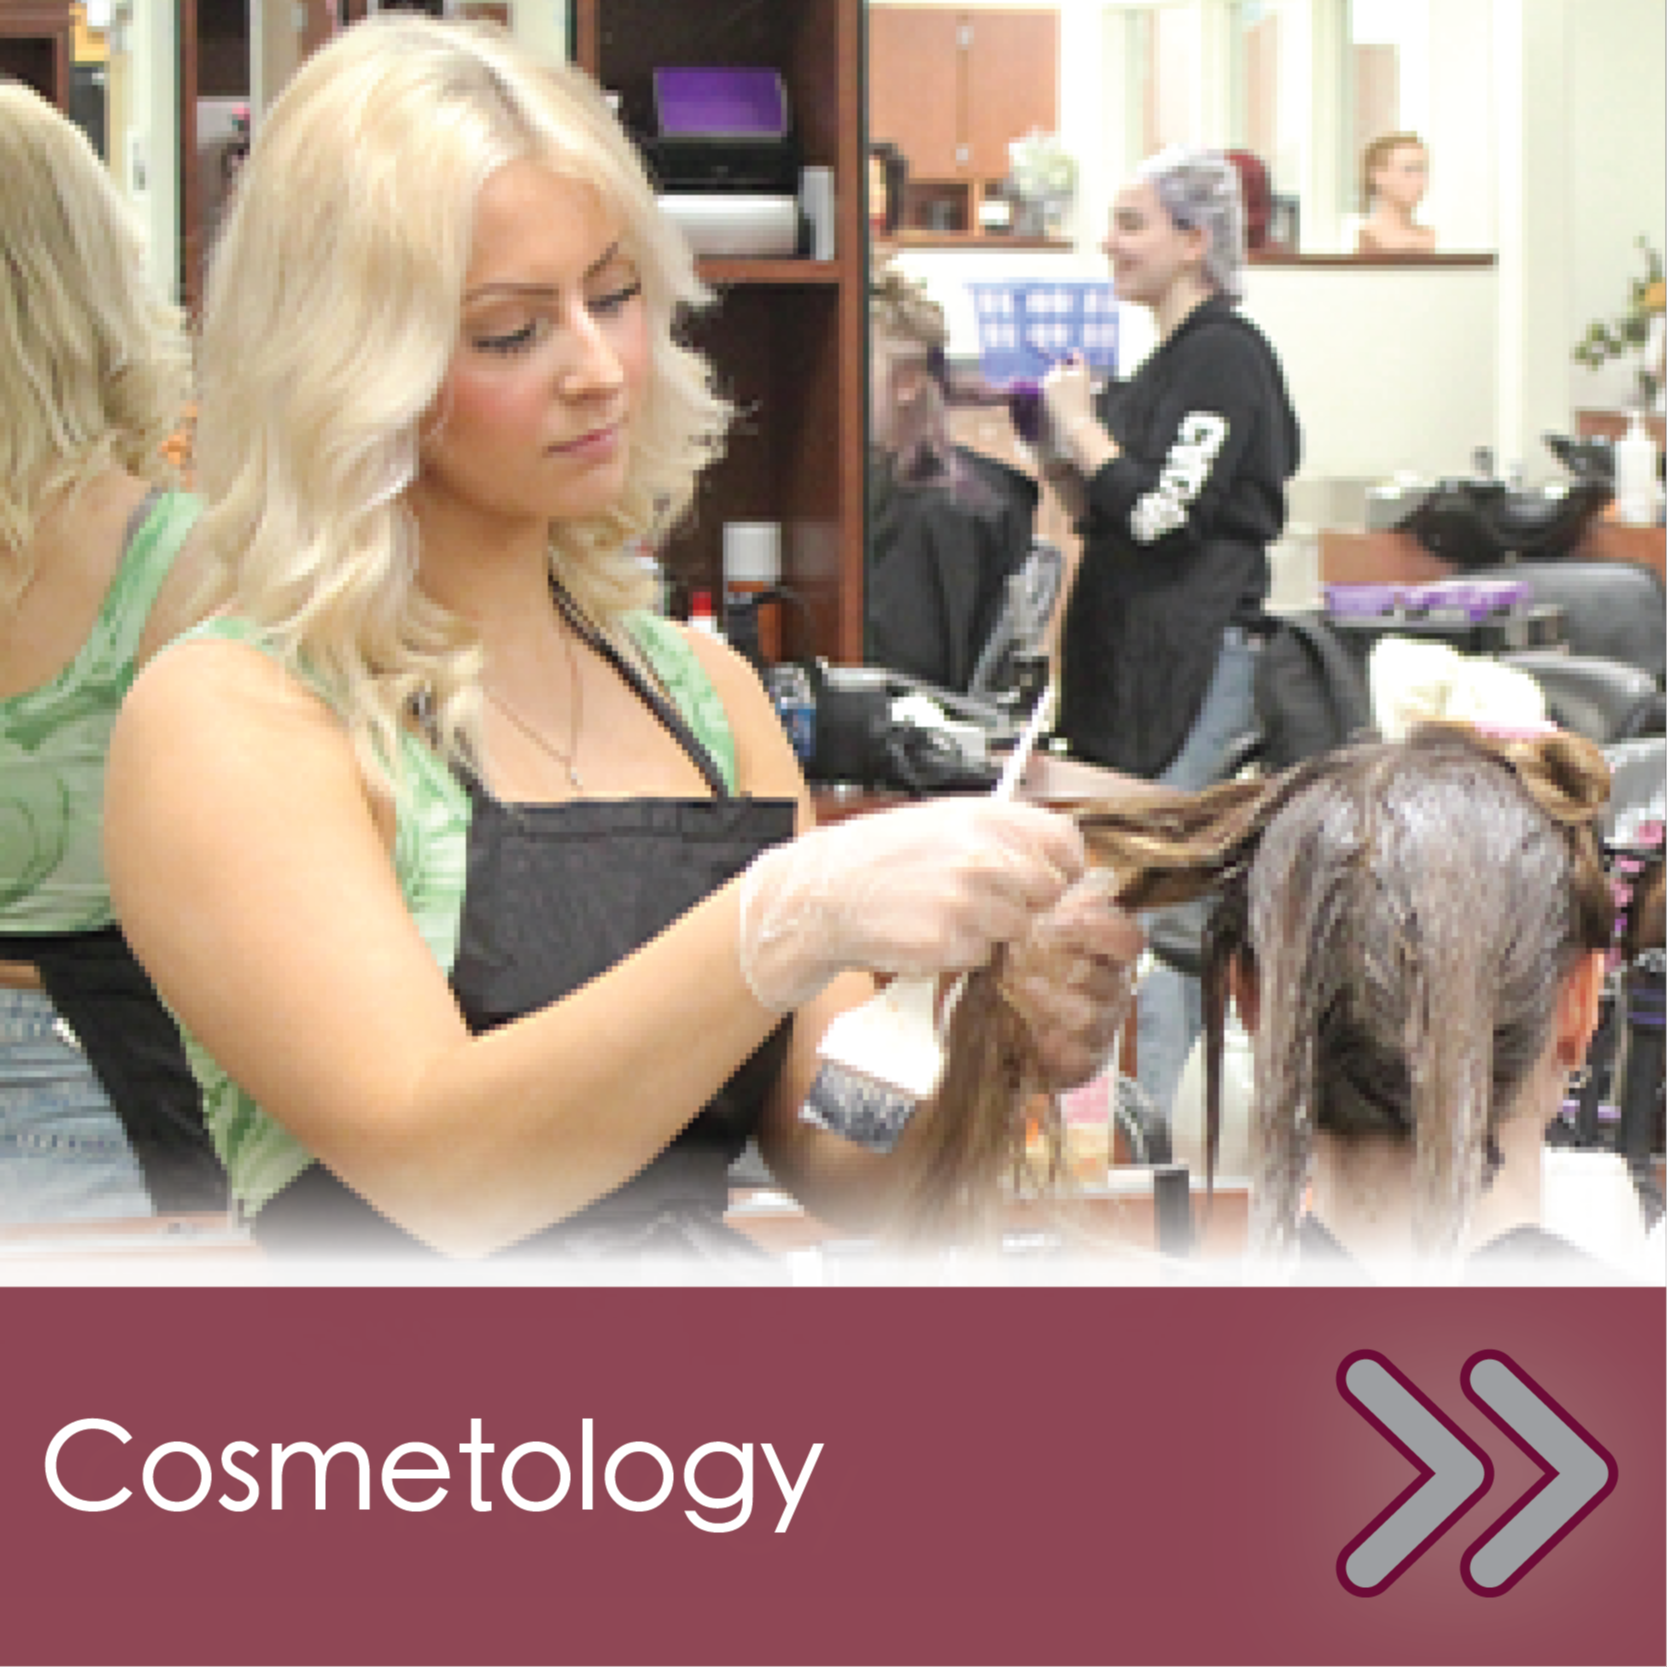 Two students demonstrating cosmetology in lab setting